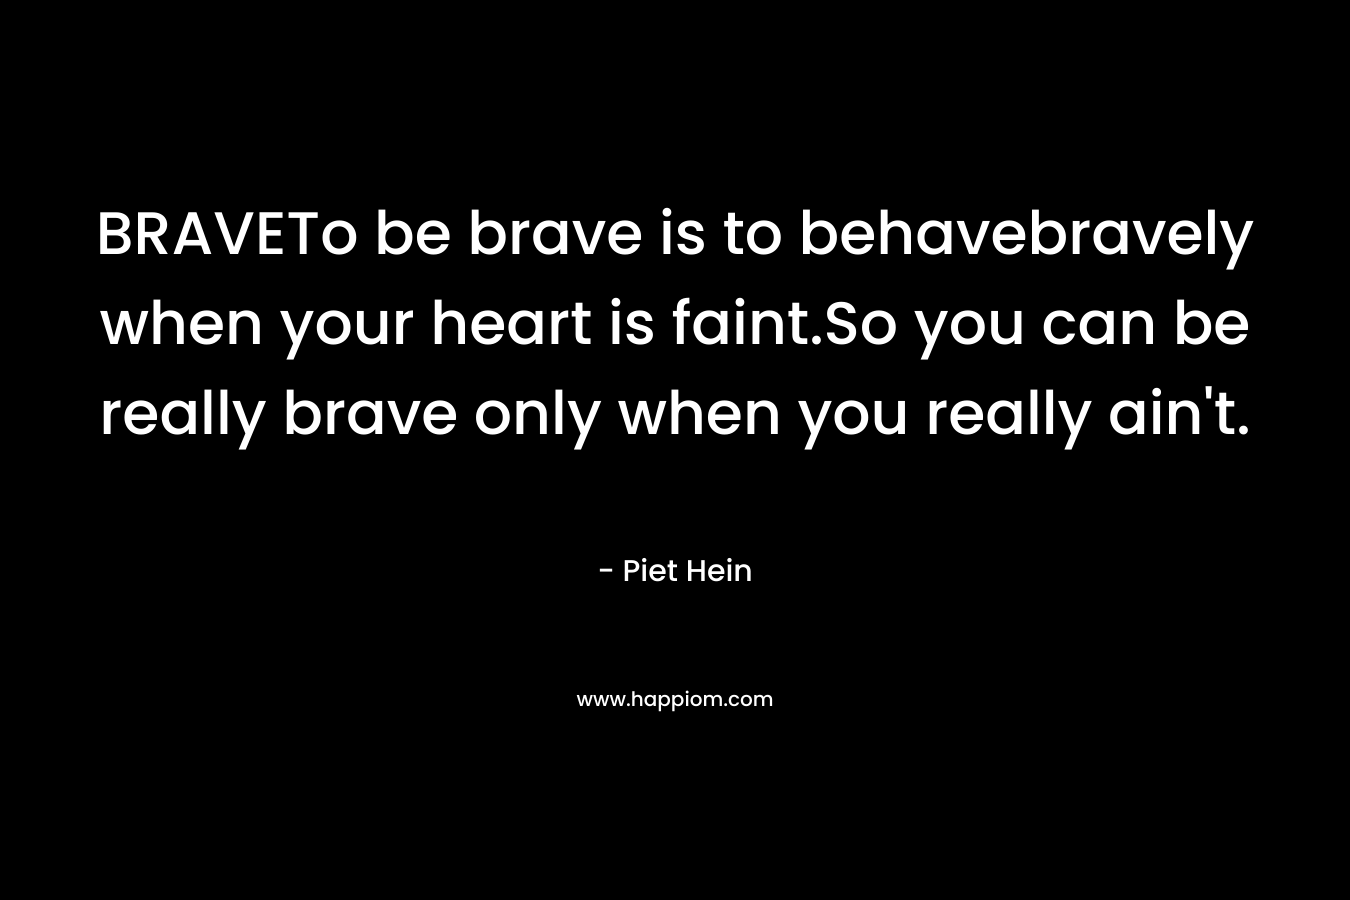 BRAVETo be brave is to behavebravely when your heart is faint.So you can be really brave only when you really ain’t. – Piet Hein